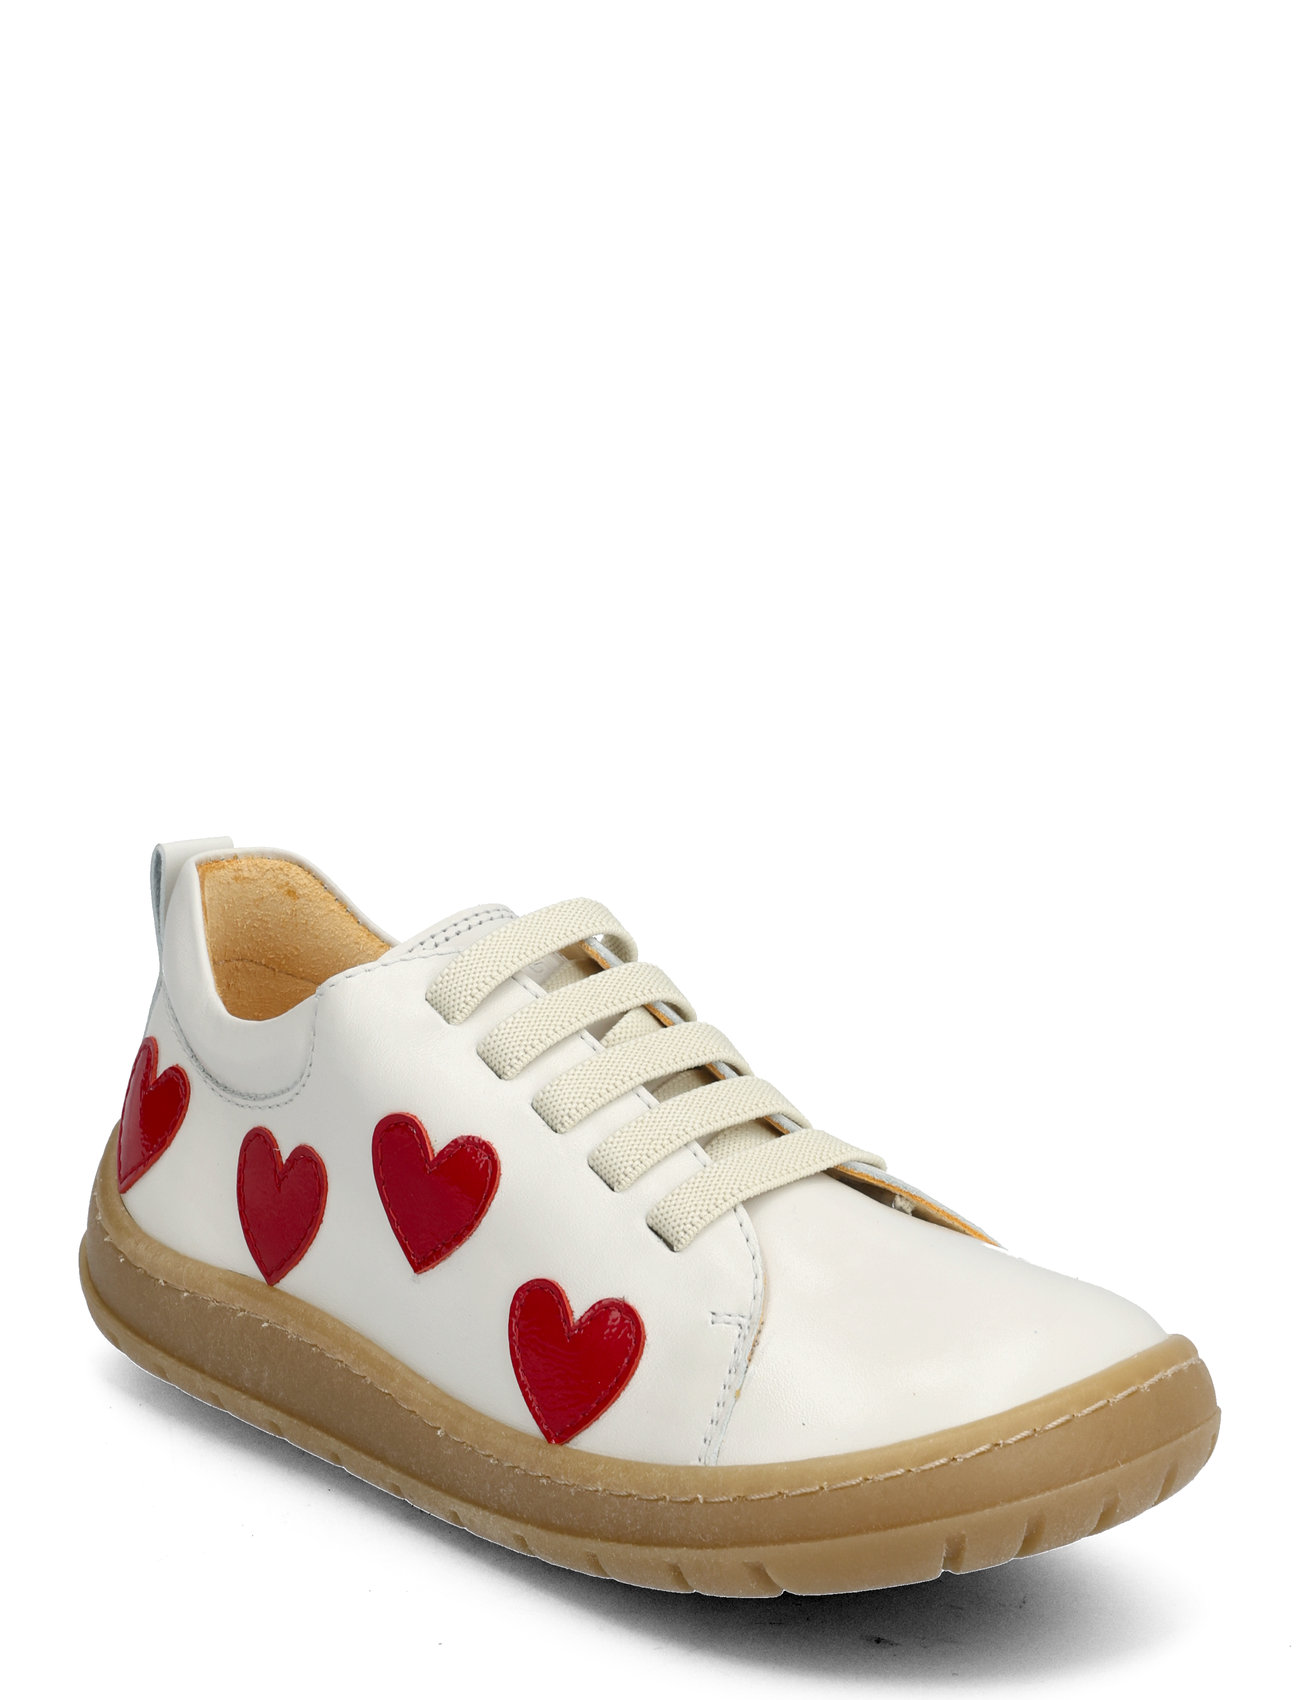 Shoes - Flat - With Lace Låga Sneakers White ANGULUS